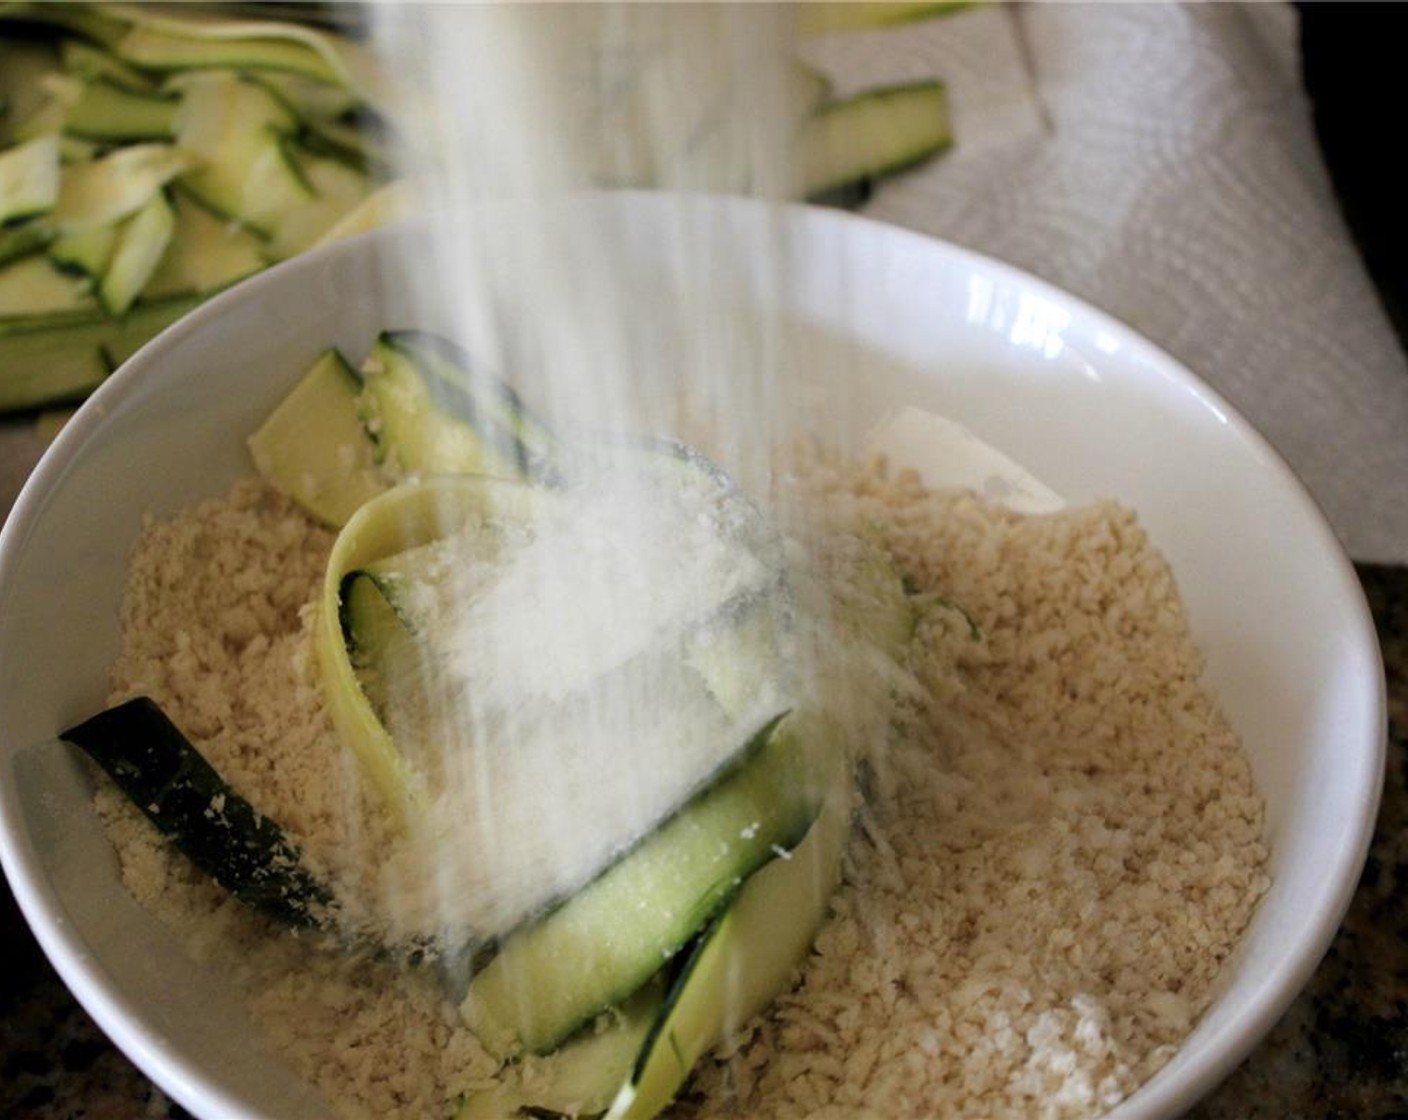 step 4 Combine the Panko Breadcrumbs (1/2 cup), Seasoned Breadcrumbs (1/2 cup), and Grated Parmesan Cheese (1/4 cup) in a dish. Take the wet zucchini and coat with the crumb mixture.